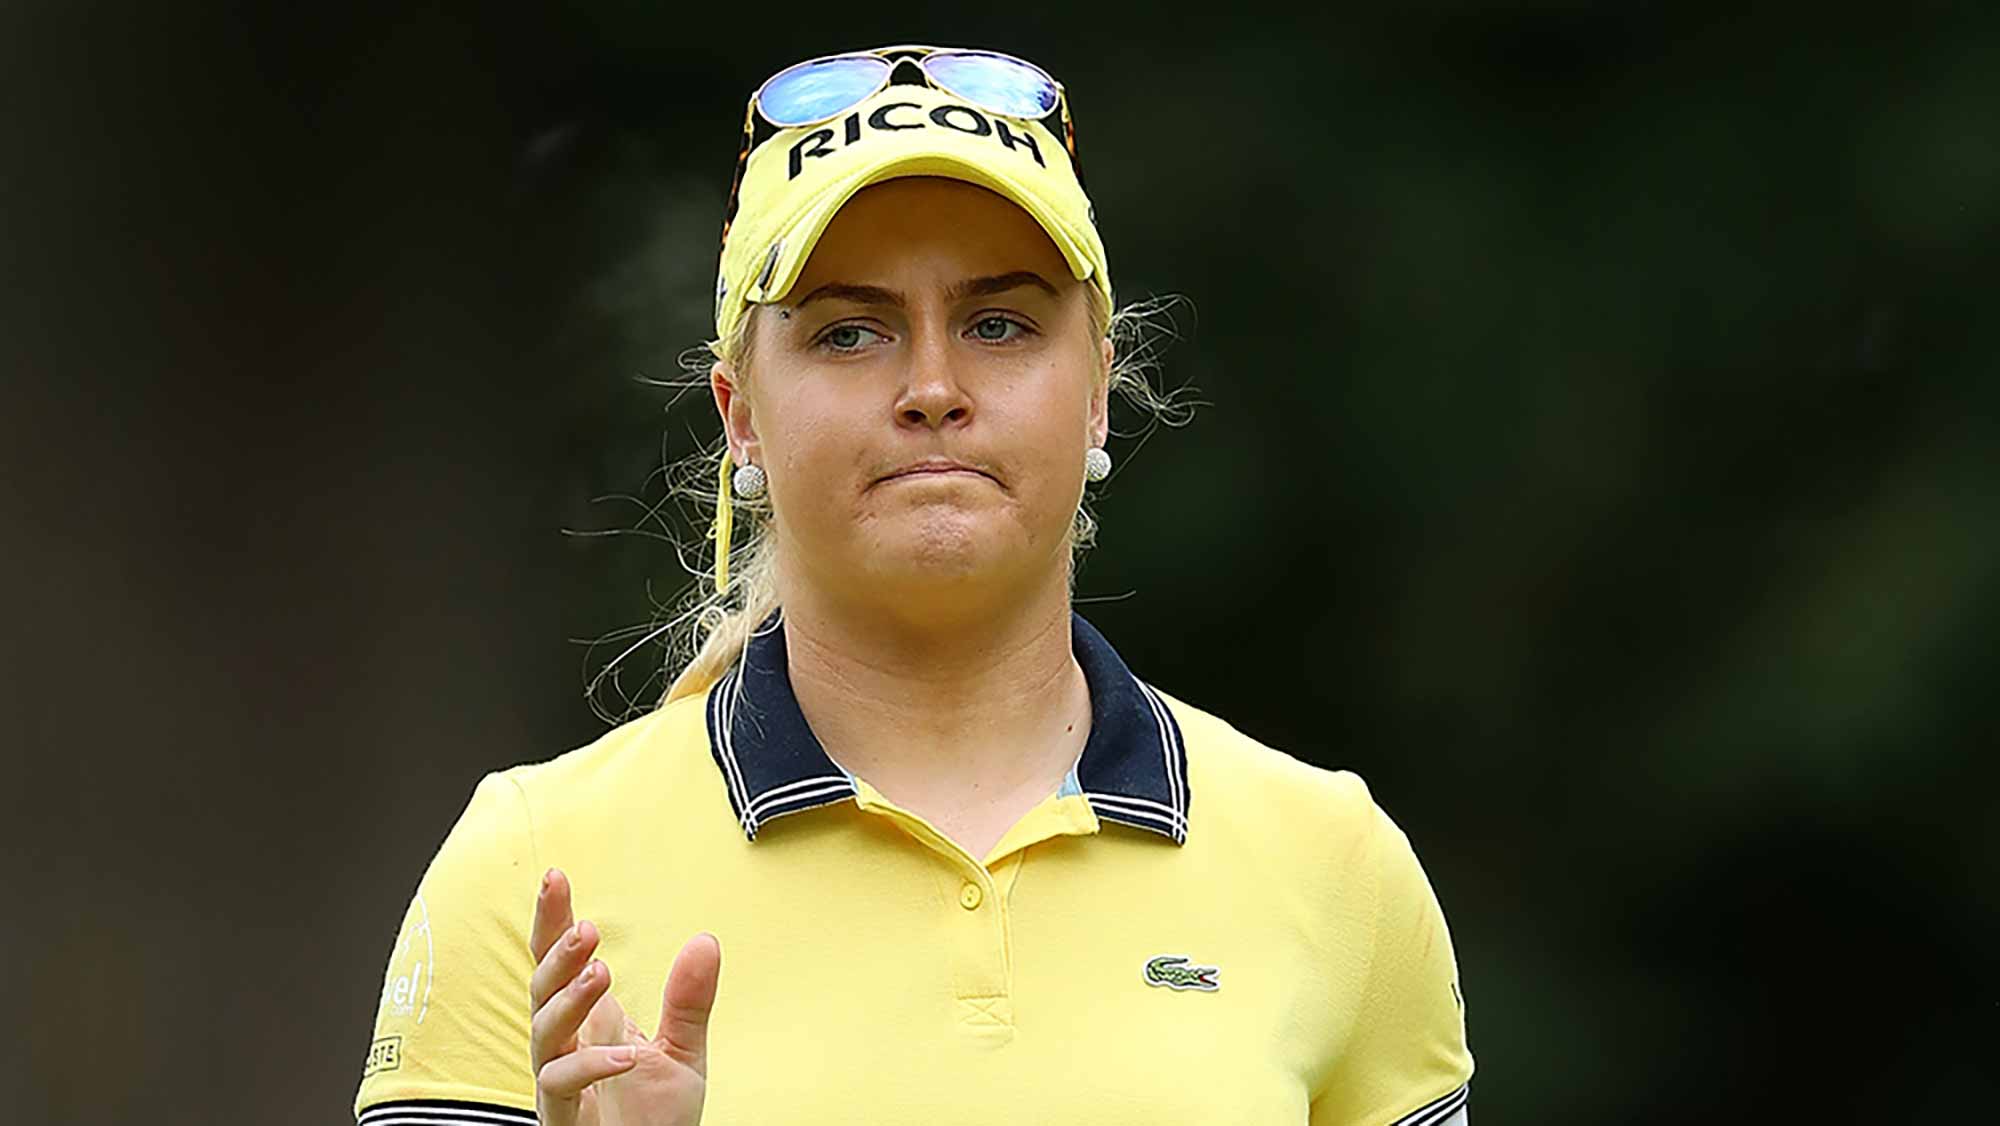 Charley Hull of England acknowledges the crowd on the 1st green during the third round of the Ricoh Women's British Open at Woburn Golf Club